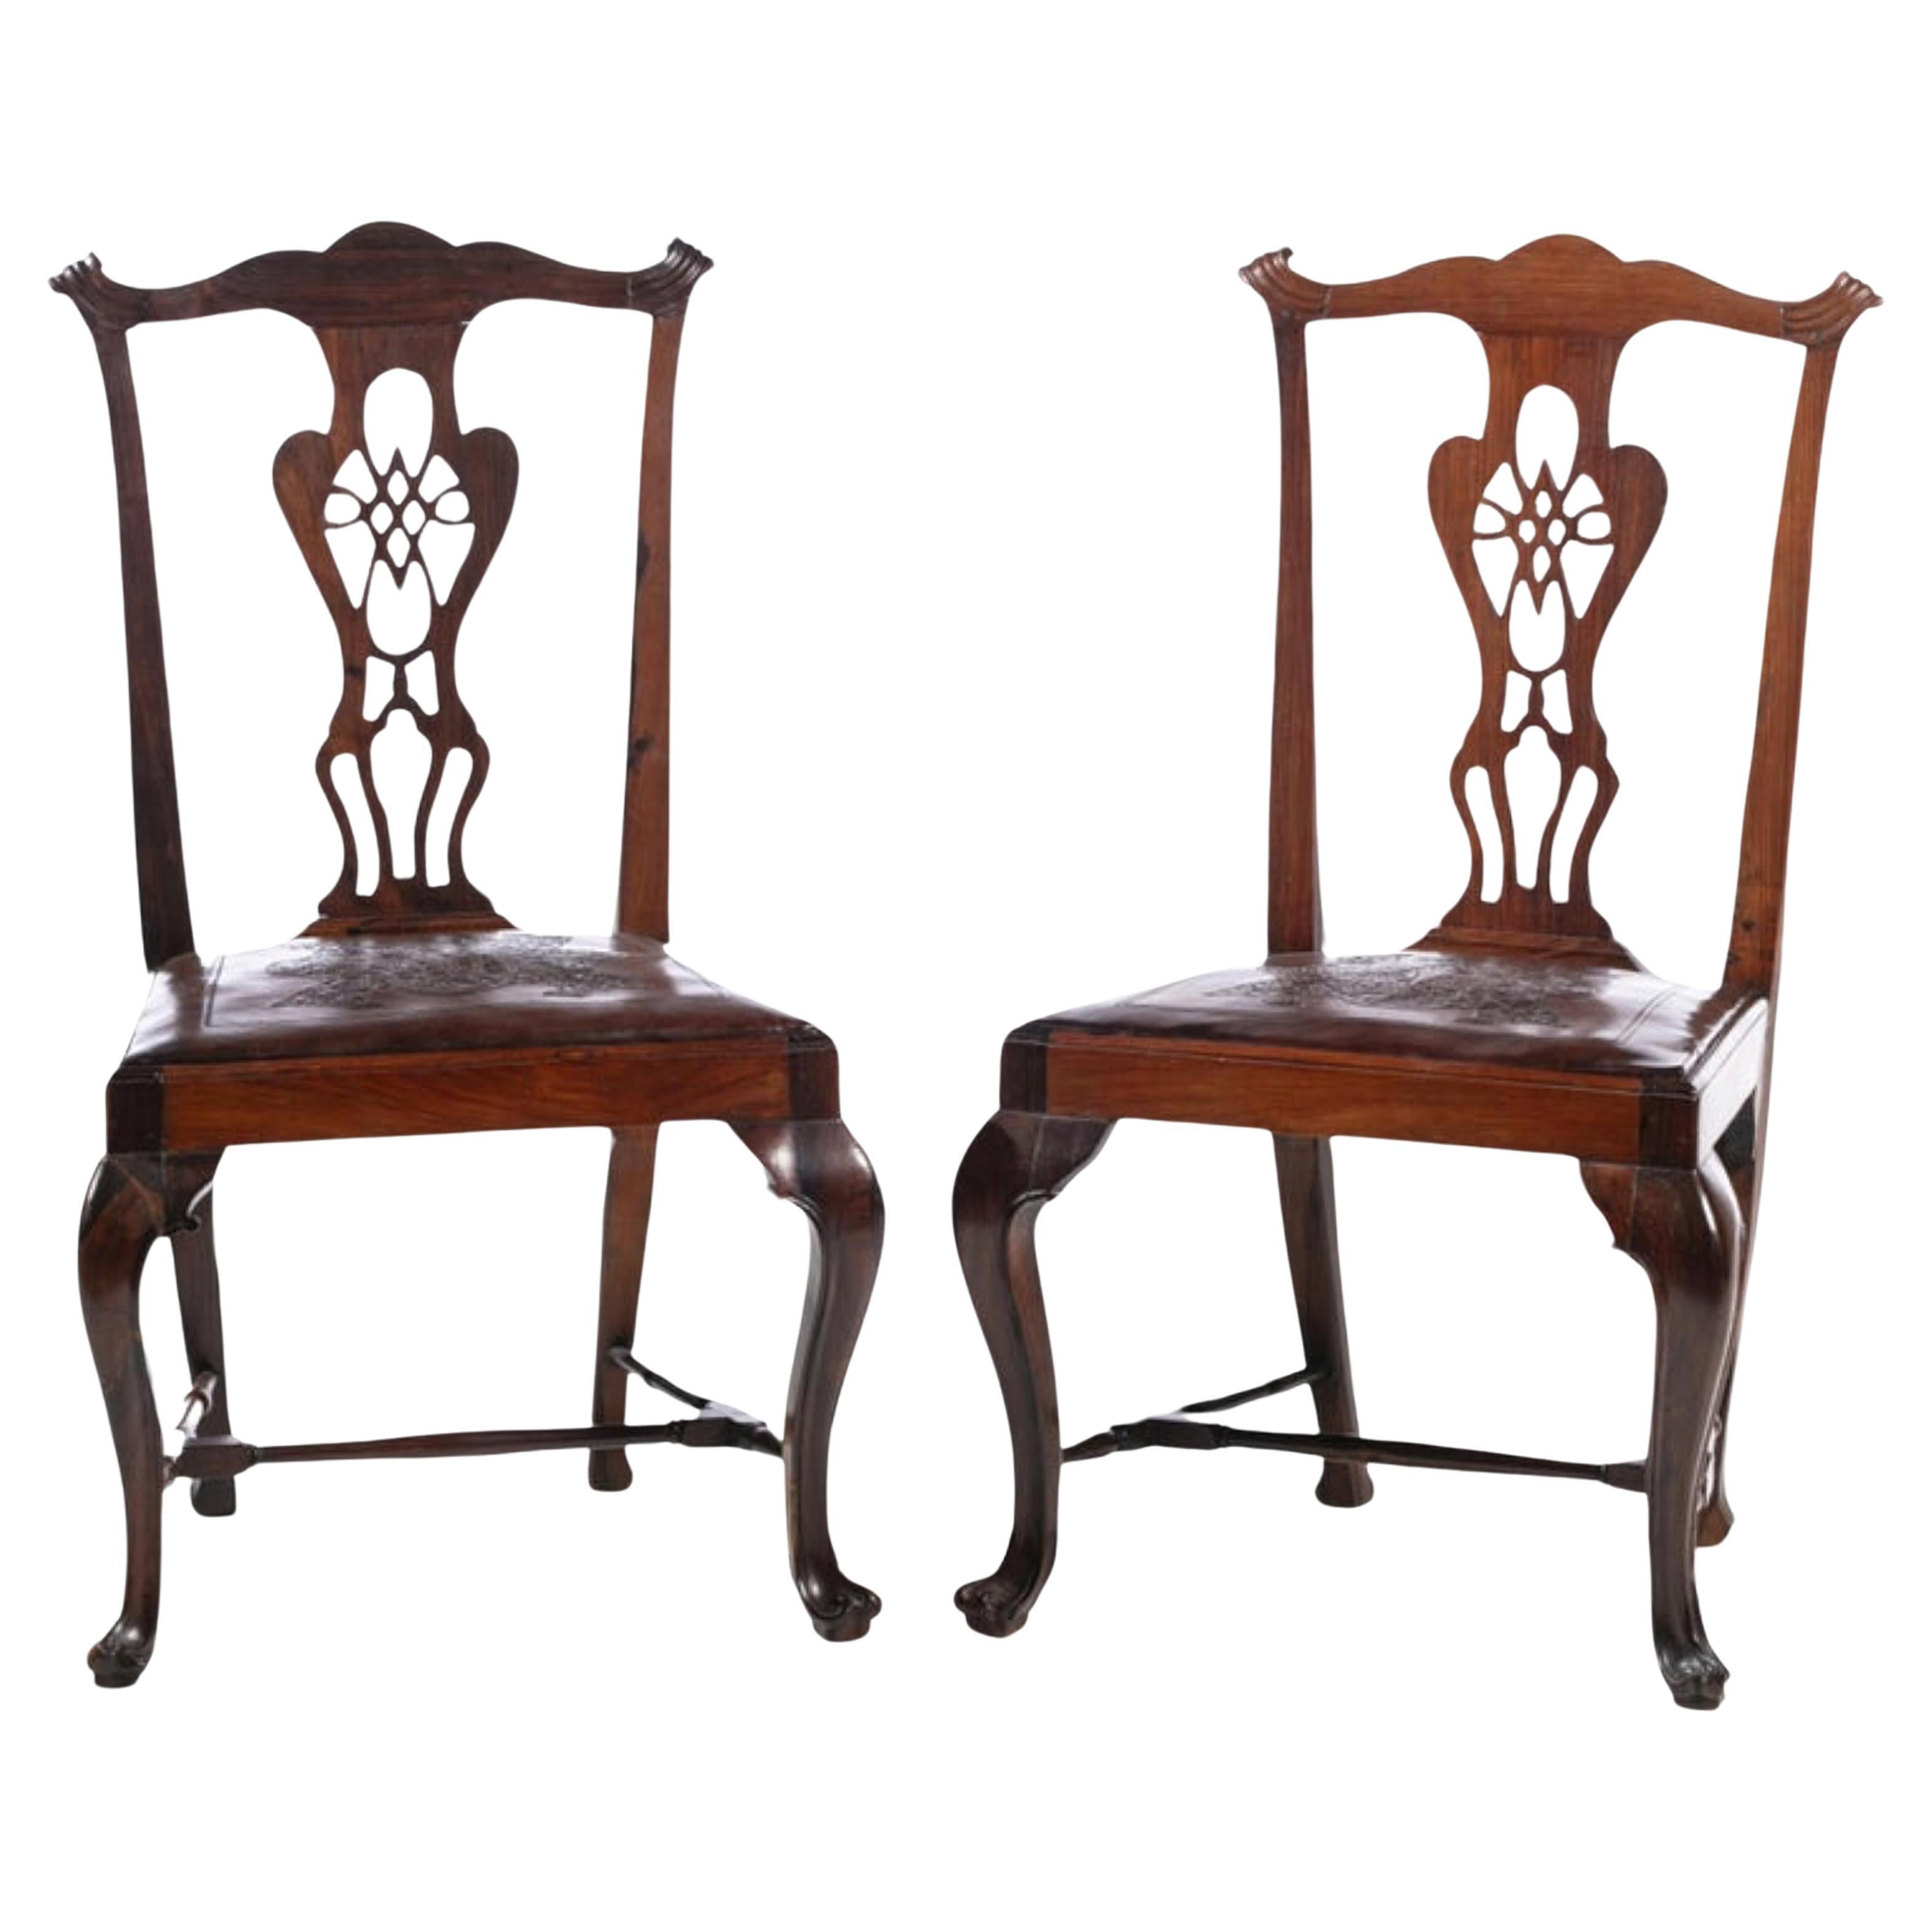 PAIR OF PORTUGUESE CHAIRS 18th Century For Sale